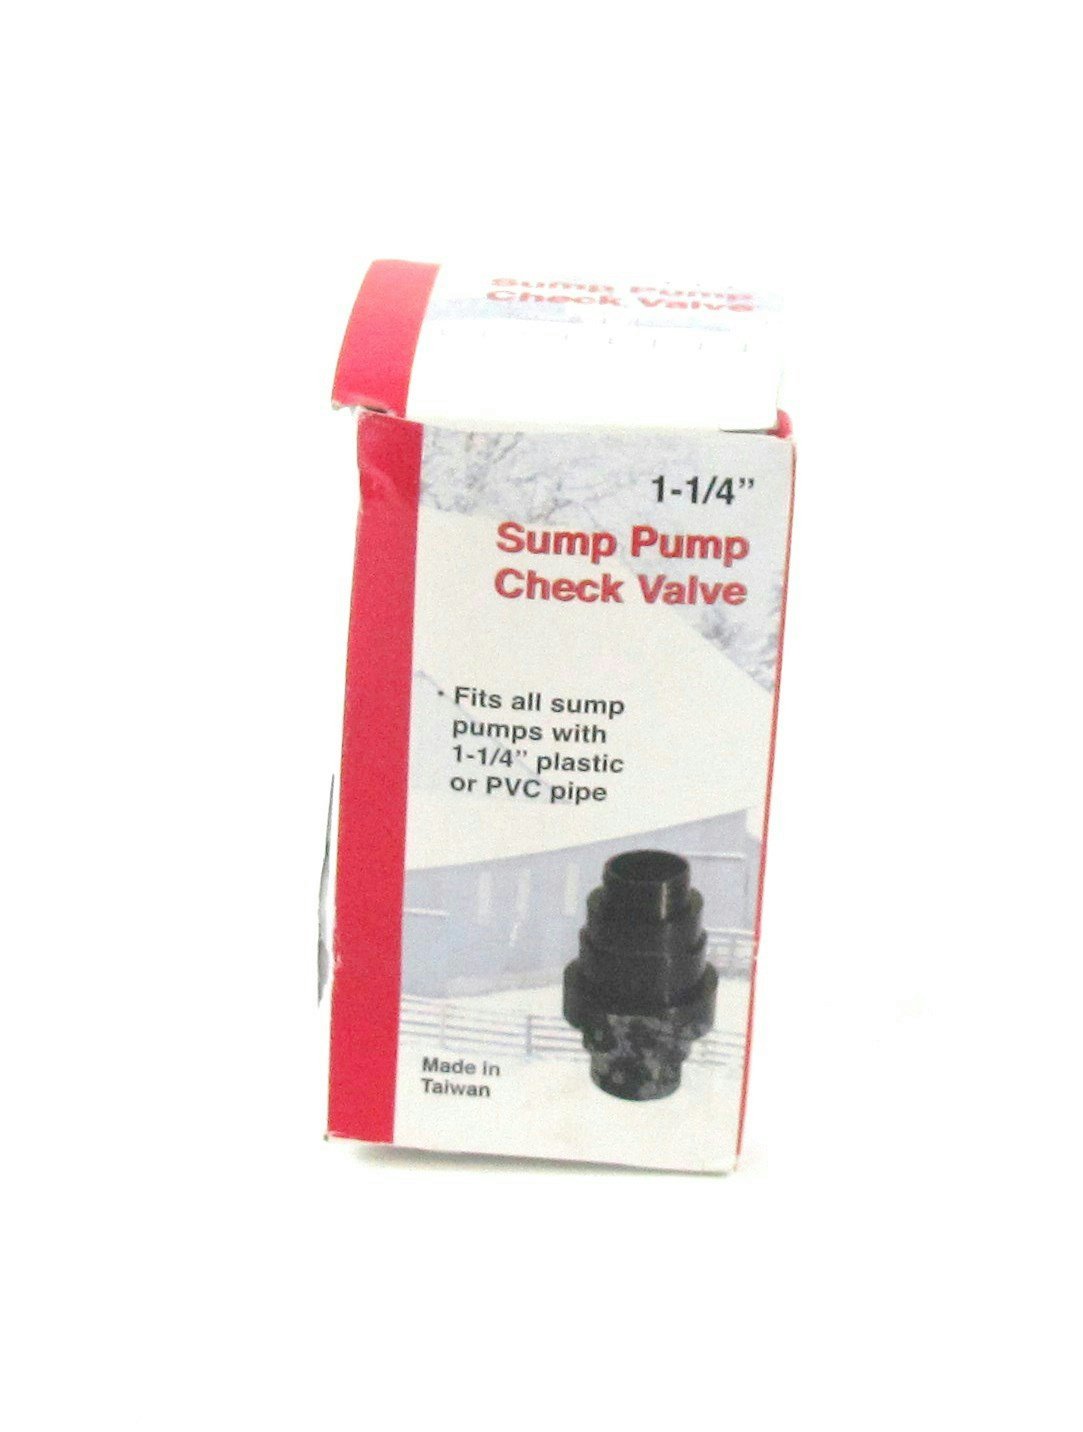 Primary image for Pro Plumber Plastic 1-1/4" Sump Pump Check Valve- 141731